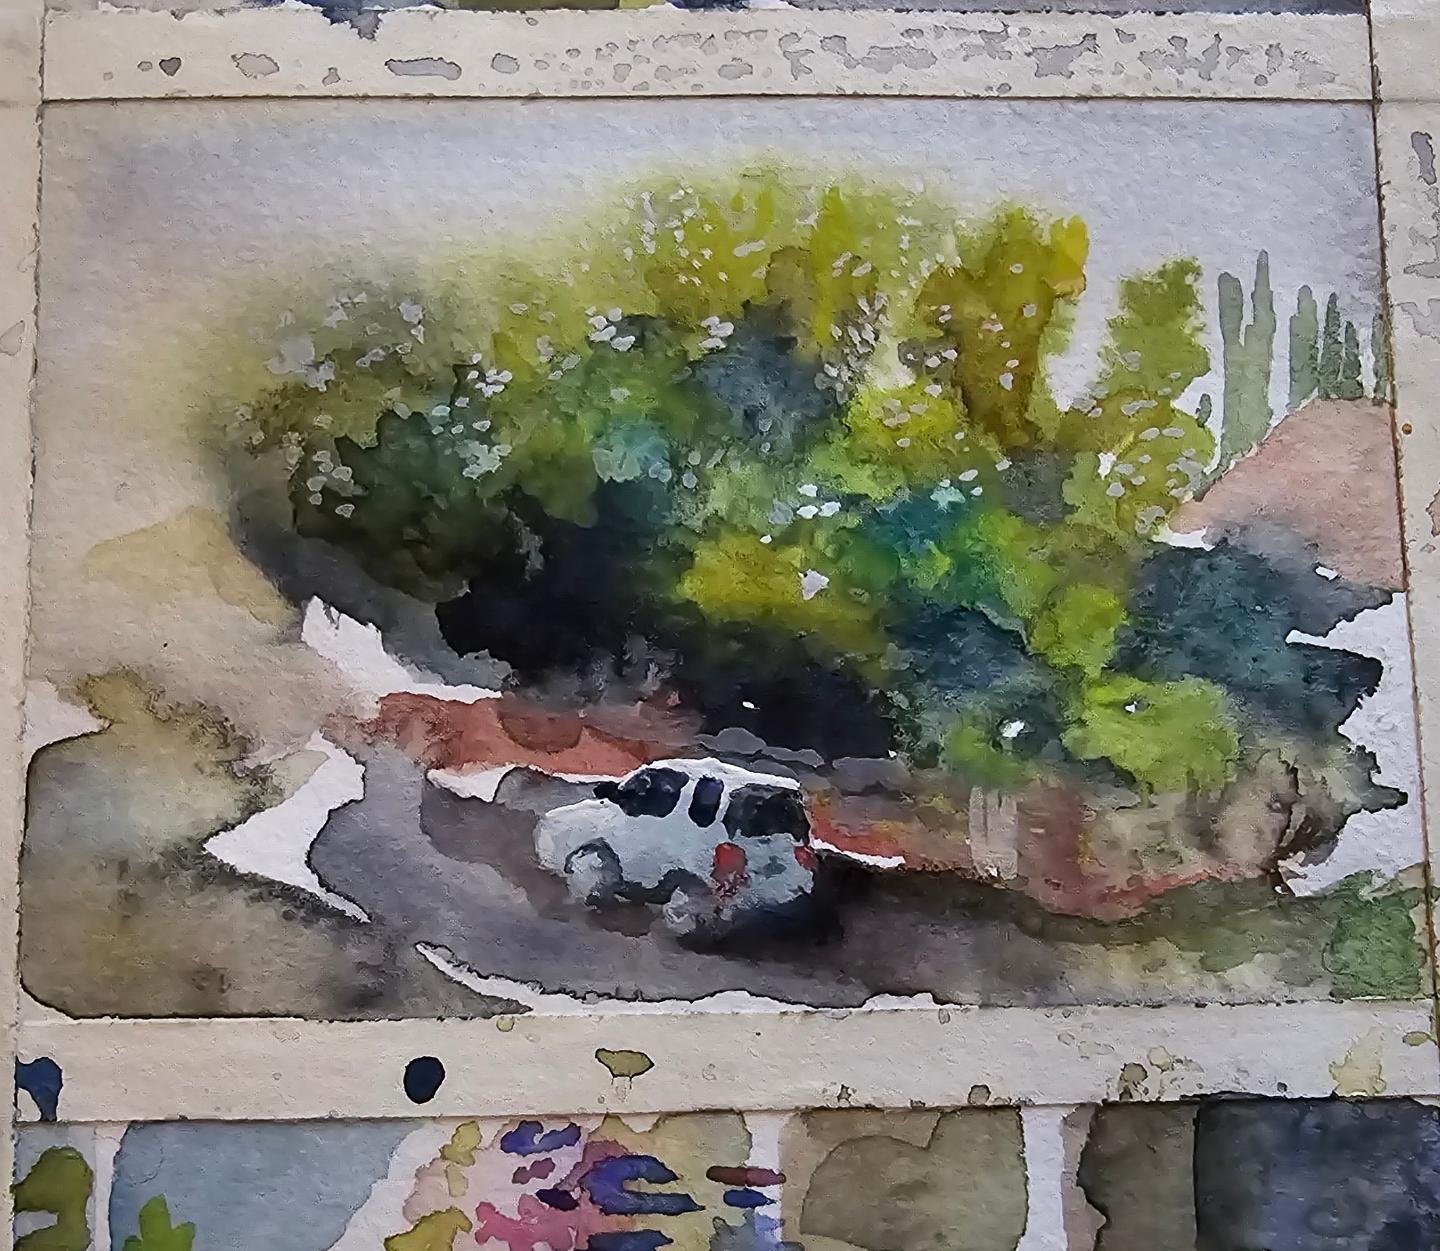 Wet-into-wet on this wet day. Broke out my tiny travel brush to get the tiny car details. The angle I painted from is slightly different from the photo due to wanting to be dry while I painted. #pleinairpril @warriorpainters #sketchbook